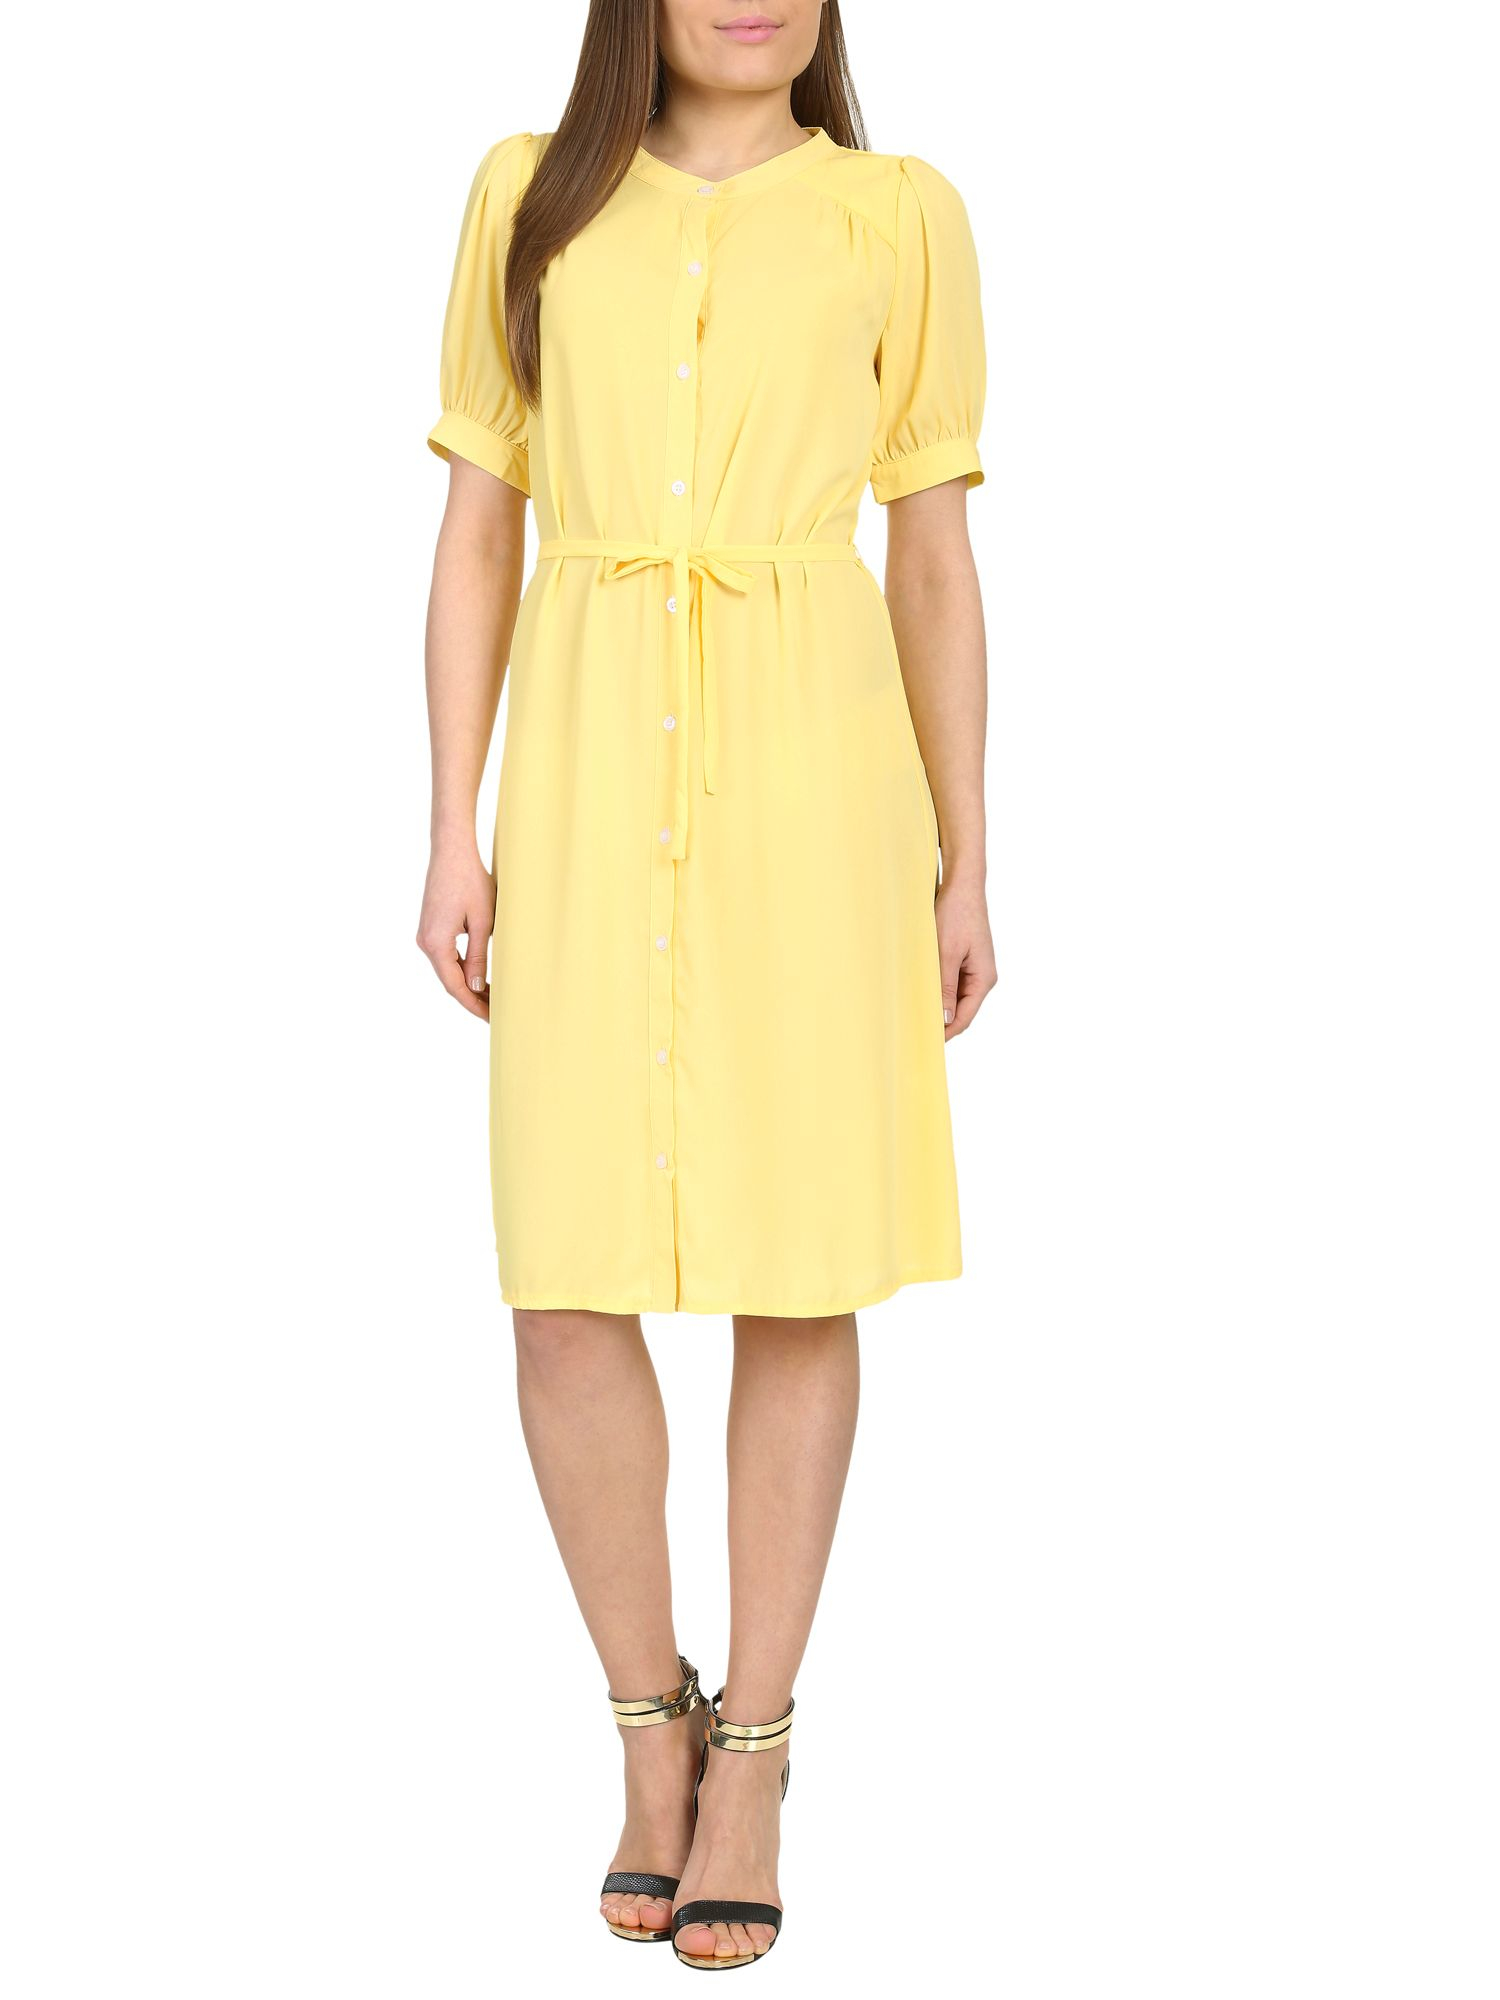 Cutie Puff Sleeves Shirt Dress In Yellow Lyst